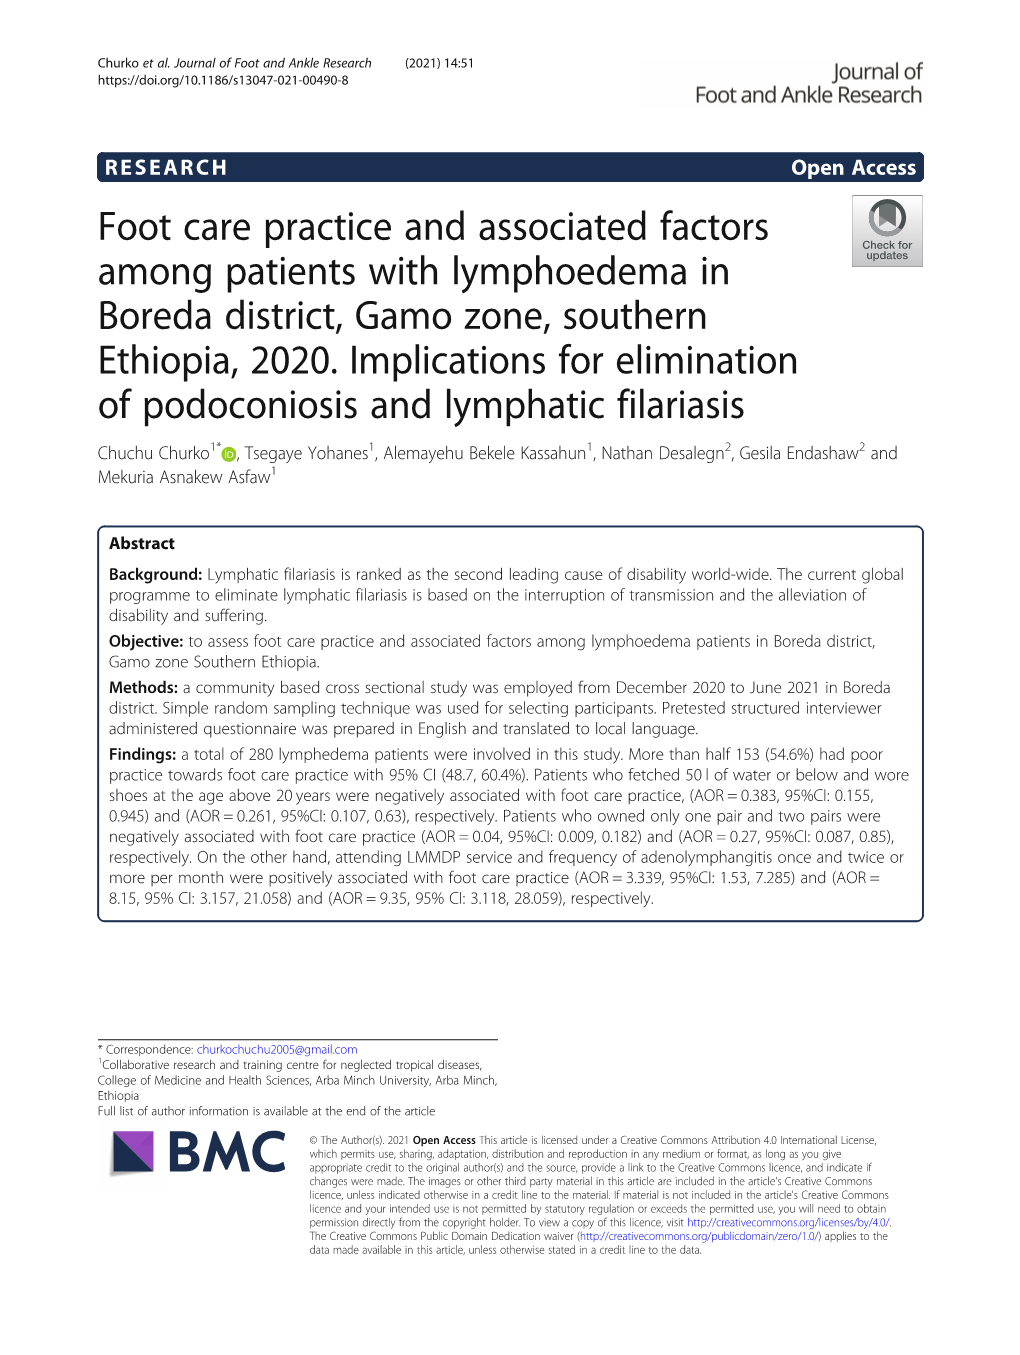 Foot Care Practice and Associated Factors Among Patients with Lymphoedema in Boreda District, Gamo Zone, Southern Ethiopia, 2020